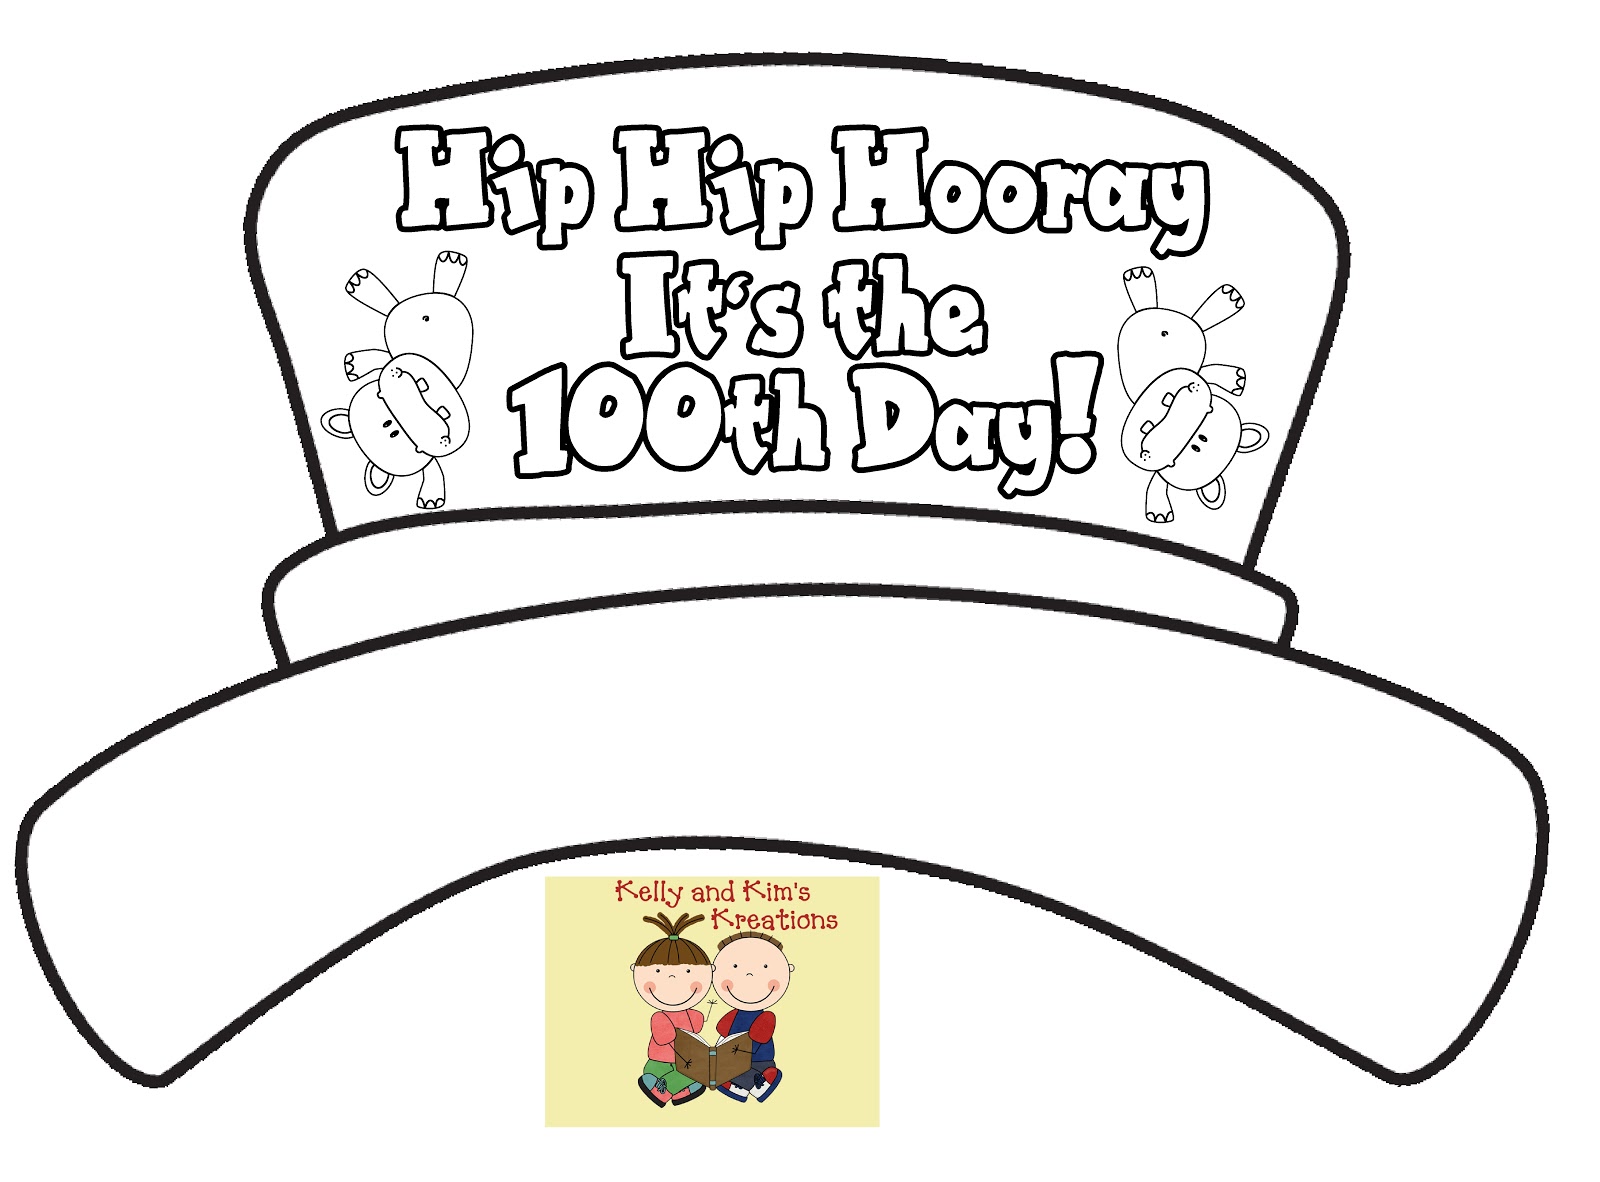 Kelly and Kim's Kreations 100th Day Friday Freebie!